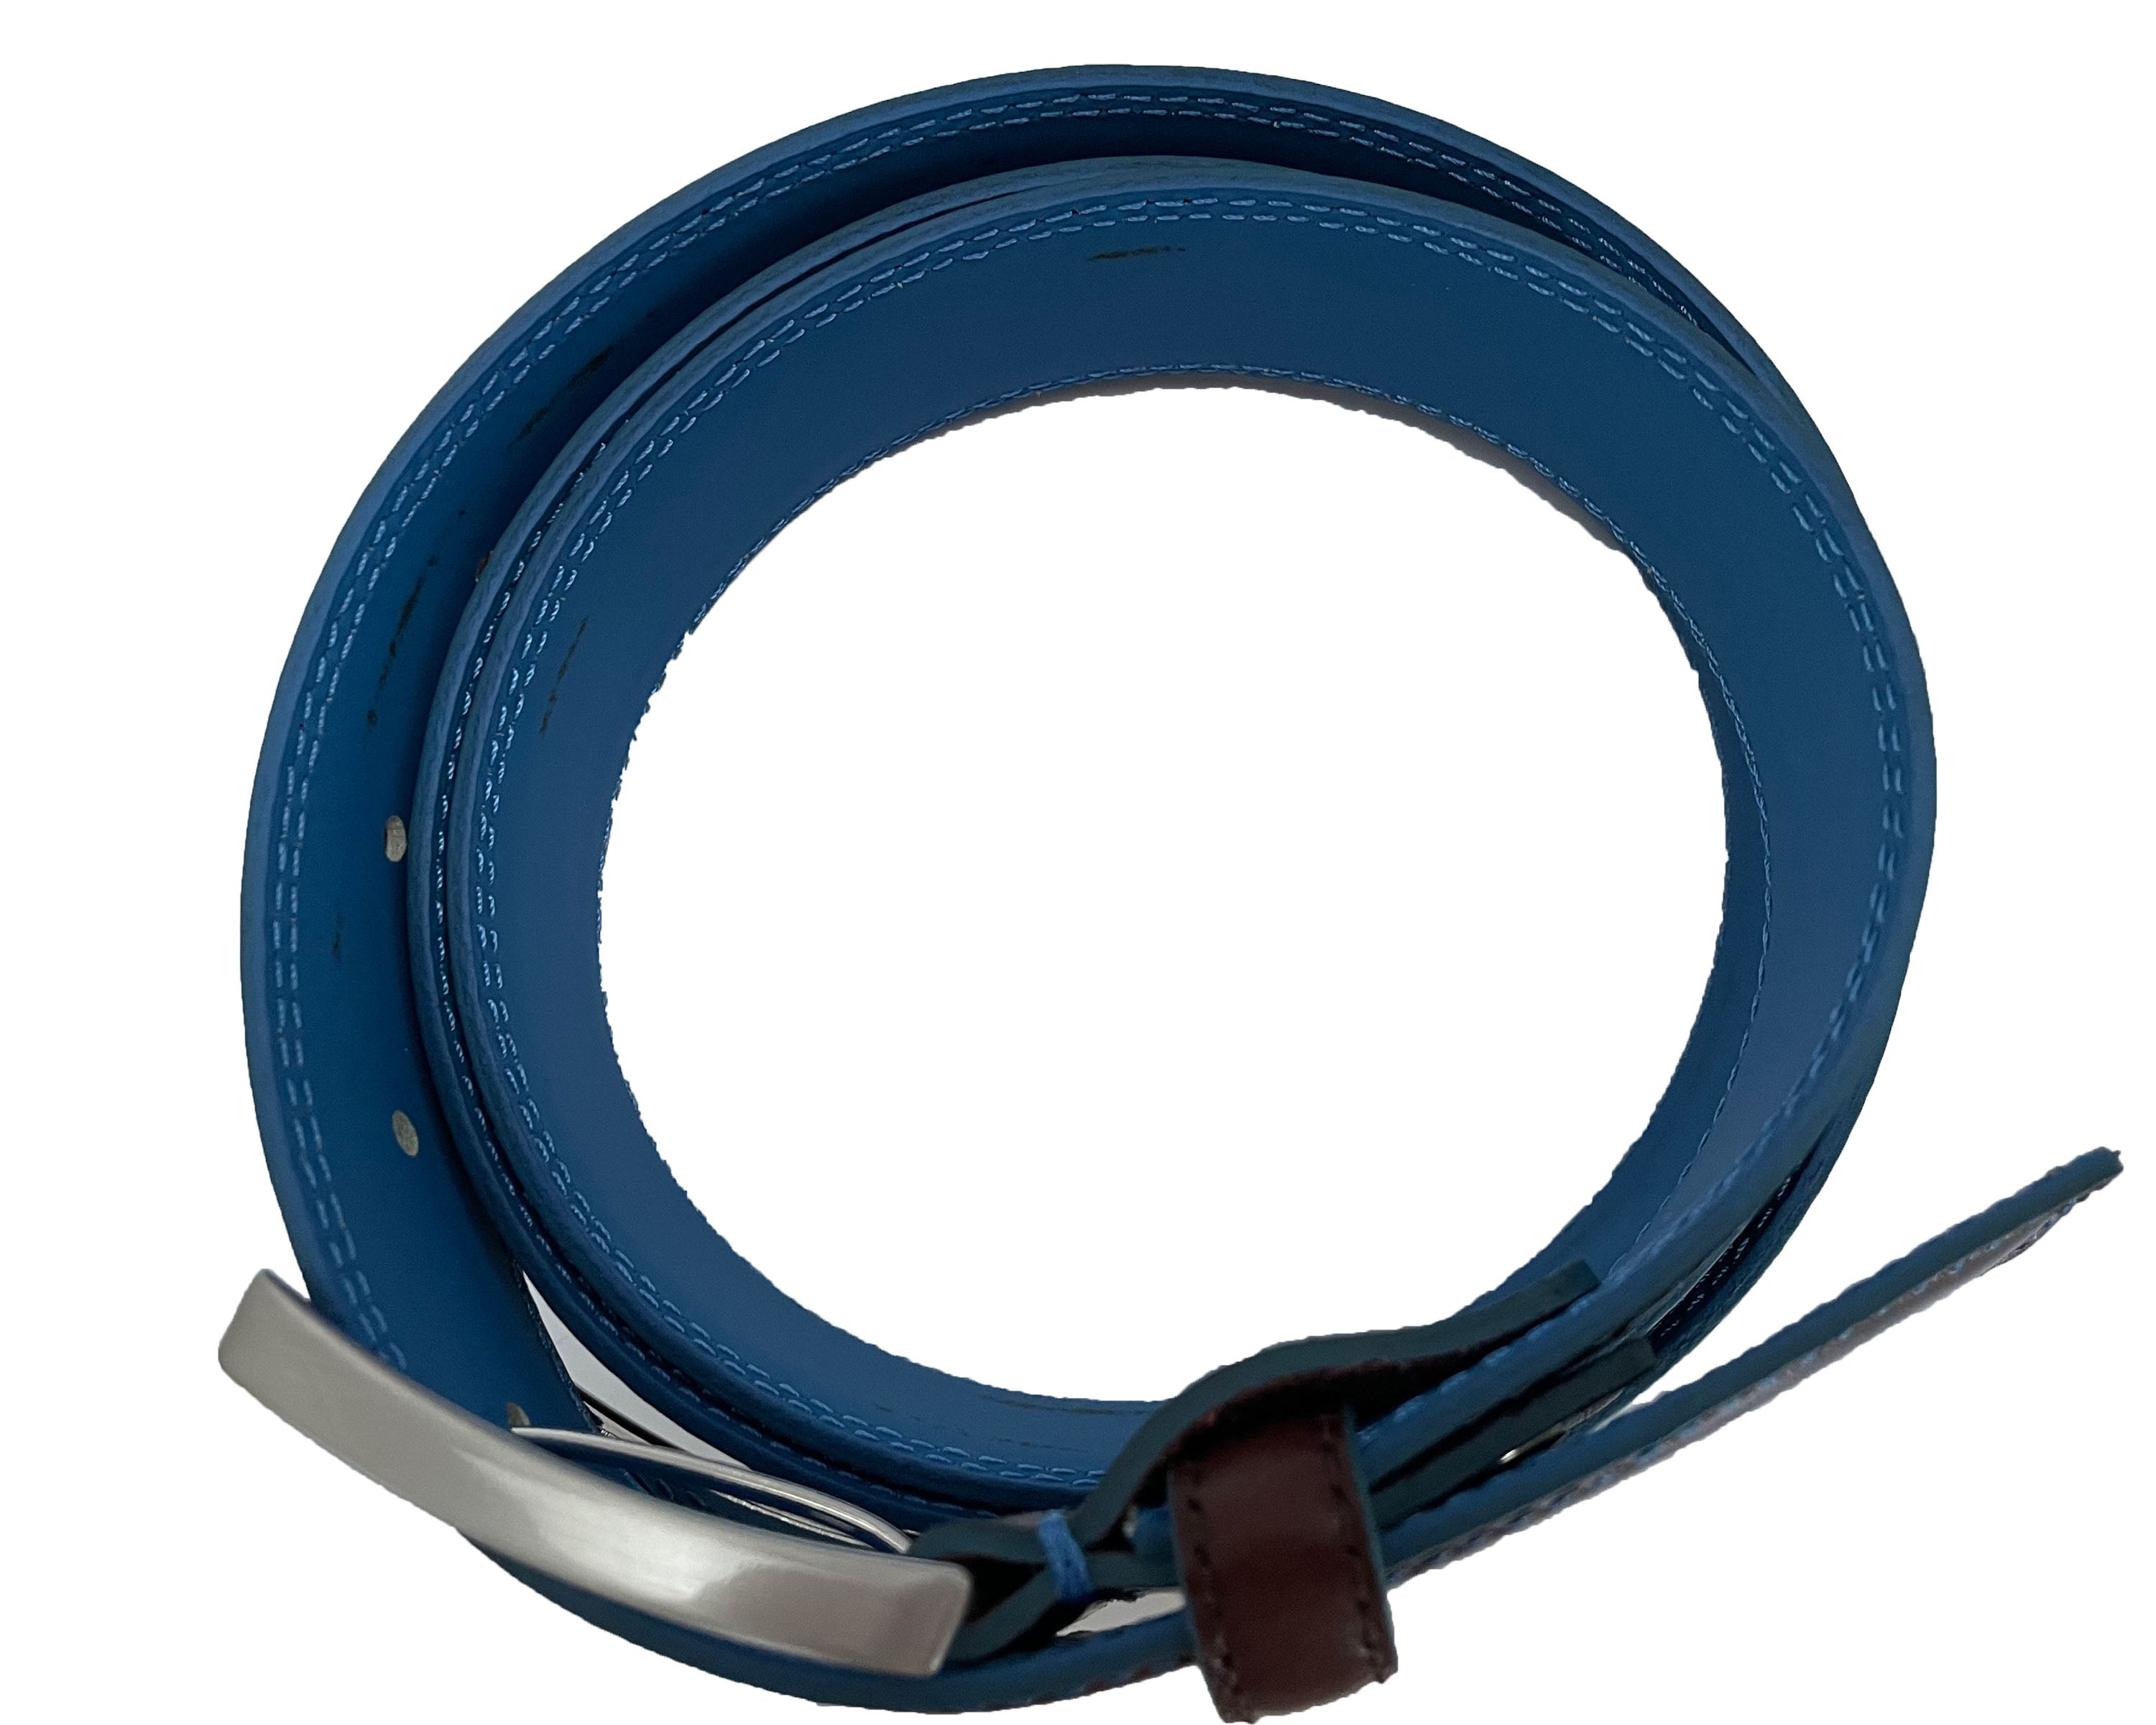 BROWN WITH CONTRAST BLUE ACCENTS CALF LEATHER BELT 35MM